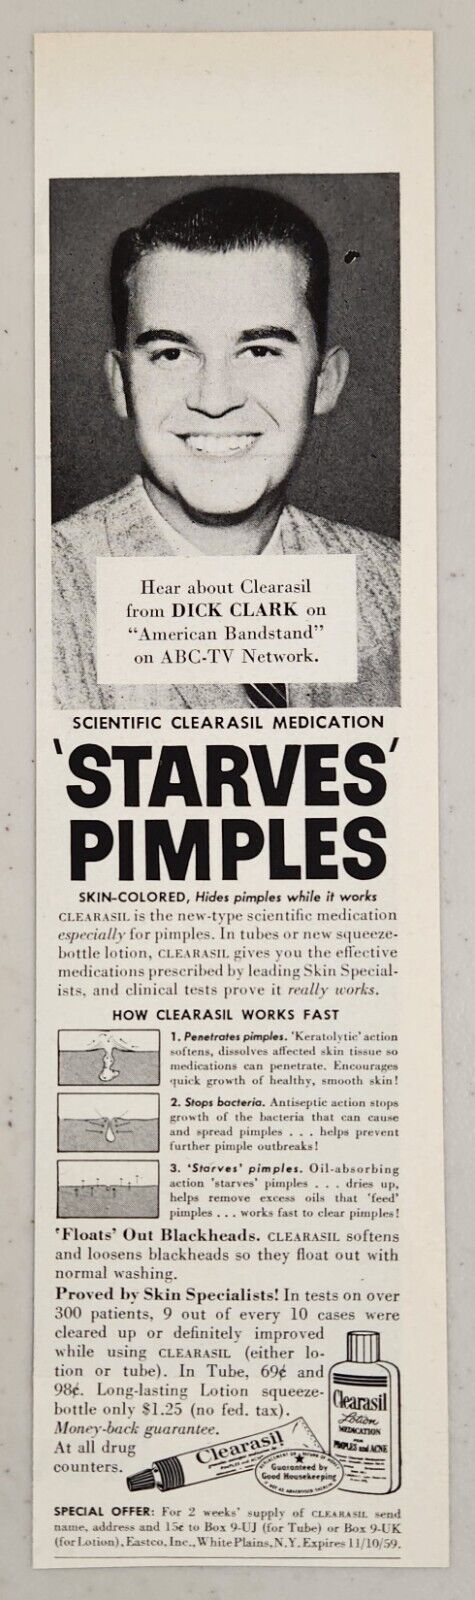 1959 Print Ad Clearasil Pimple Medication Dick Clark American Bandstand